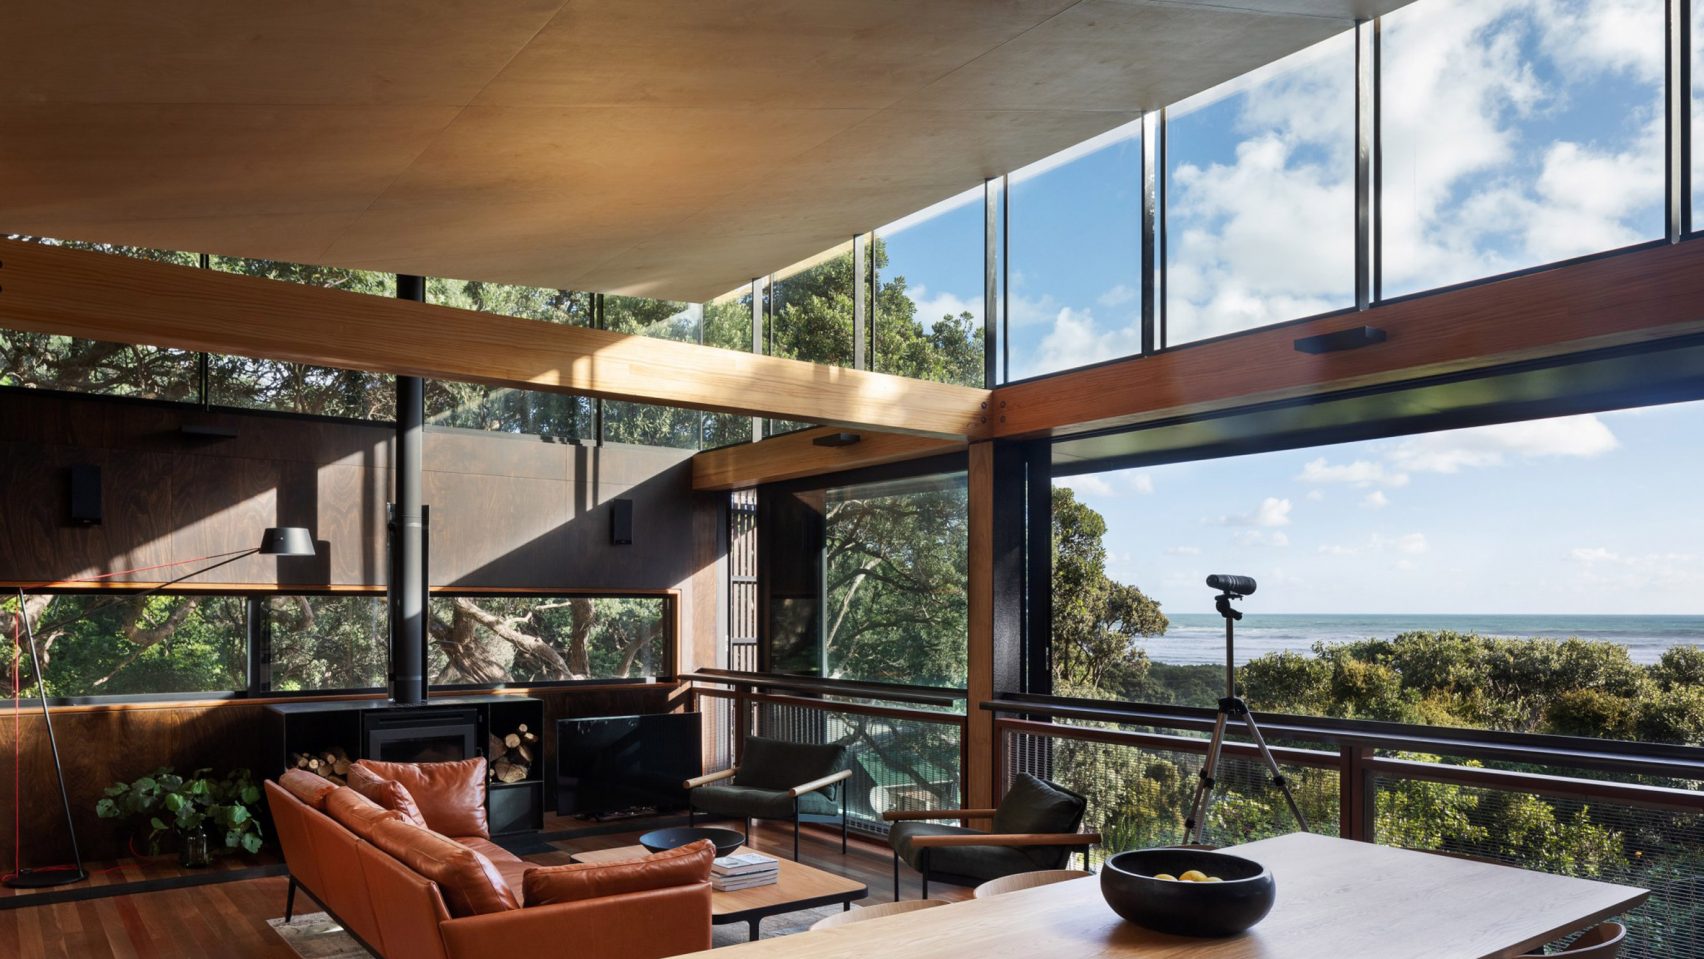 House with views to the sea surrounded by trees in New Zealand